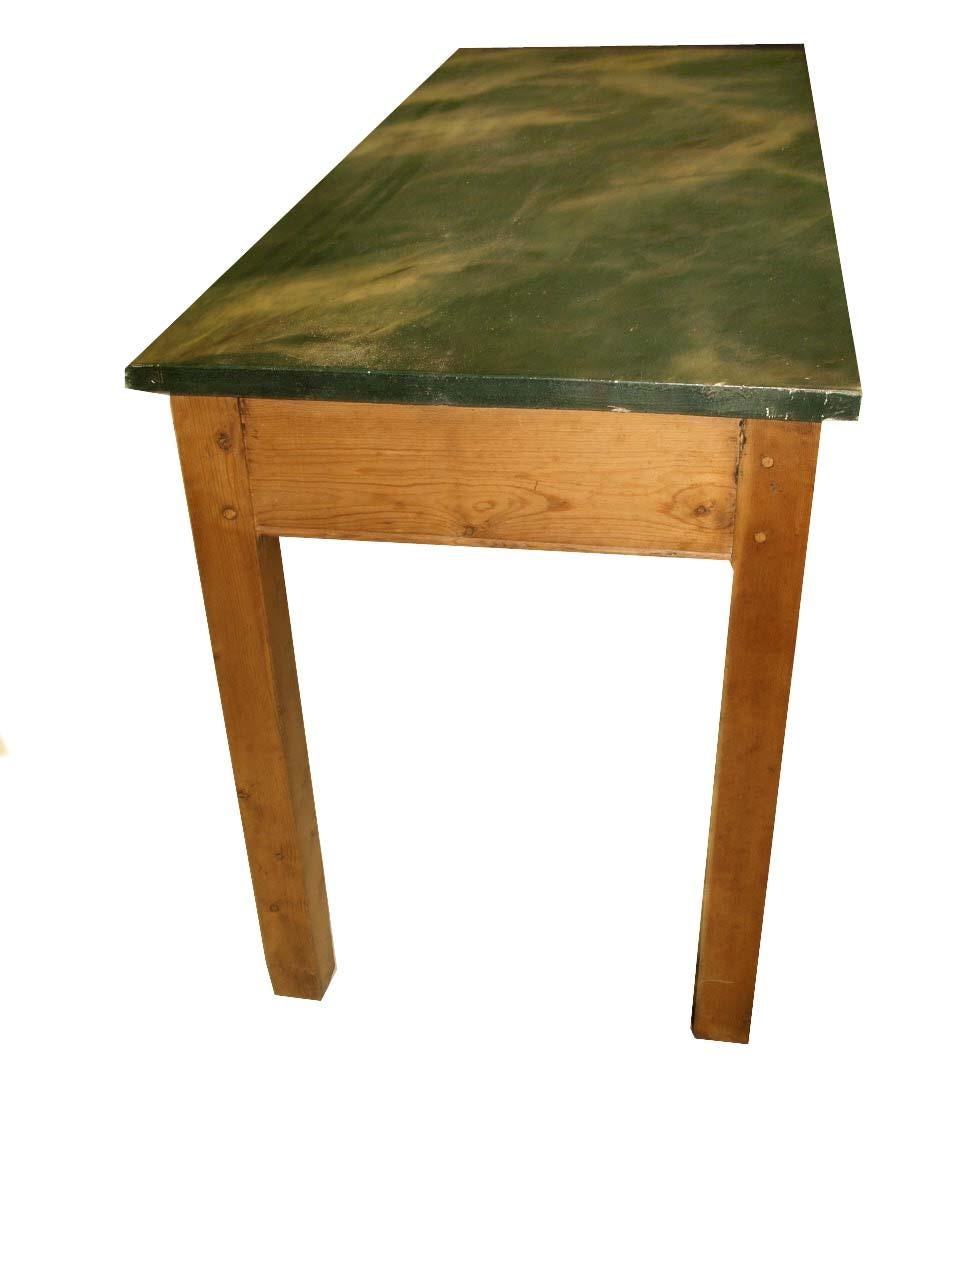 English pine faux marble console table, the faux painted top simulates a beautifully grained verde marble, the straight legs with exposed double peg construction. The apron has an incised line at the bottom that continues on all four sides, this